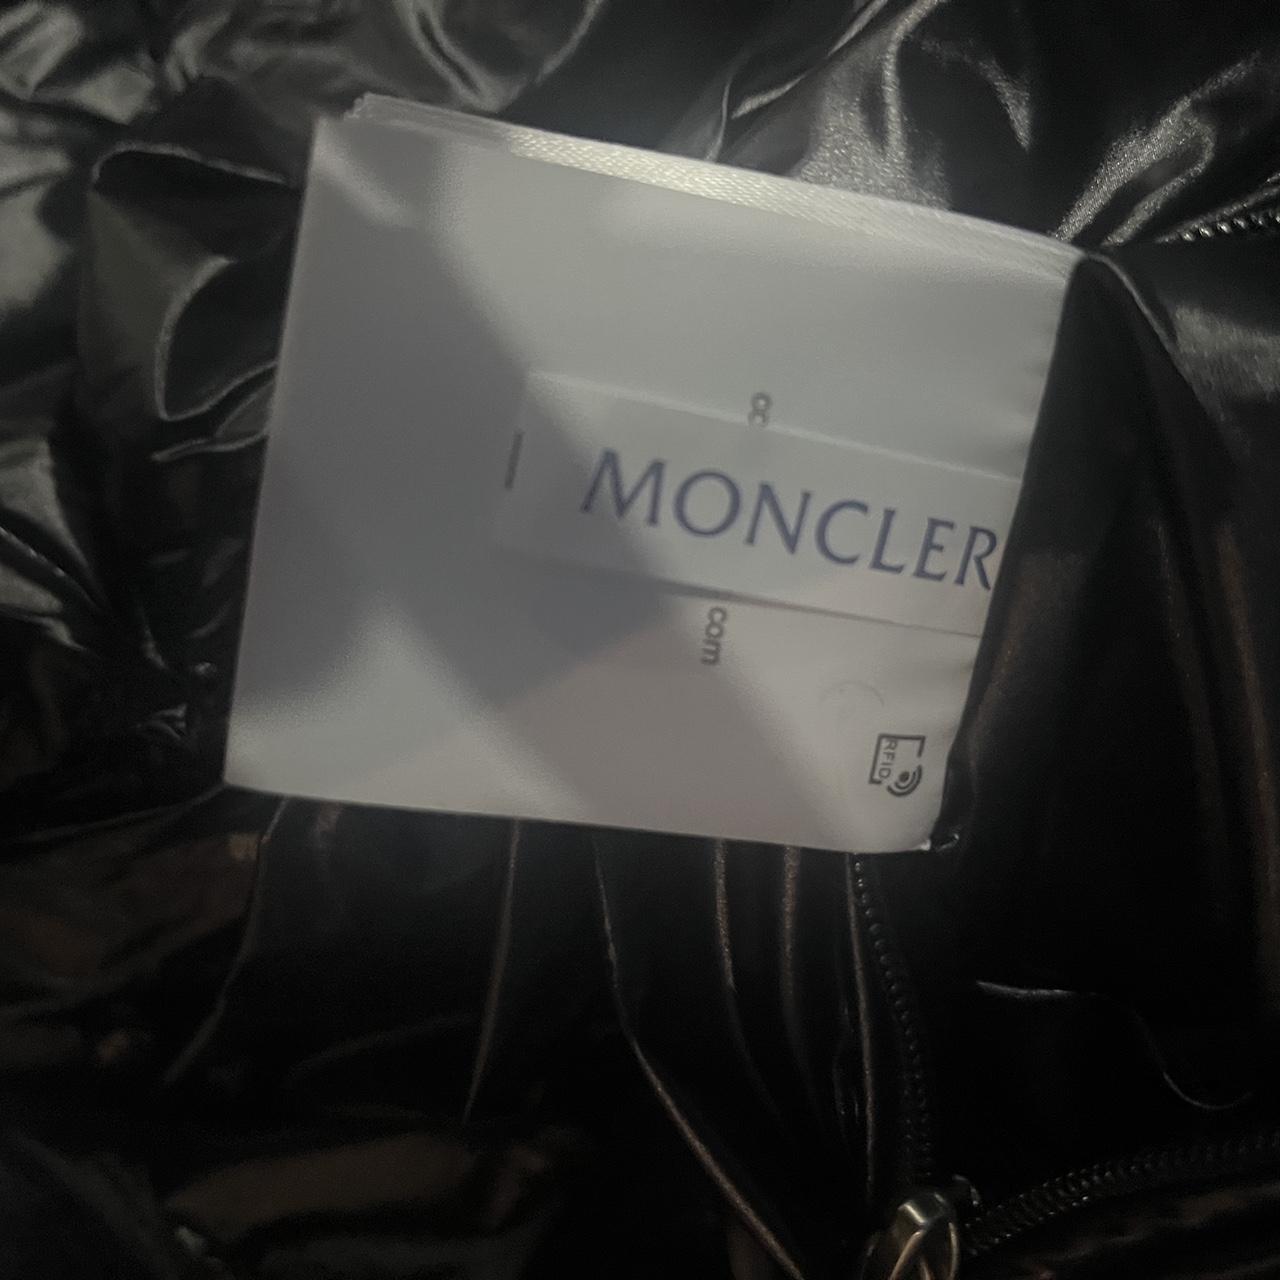 Monclear maya down jacket (black) Trying to quick... - Depop